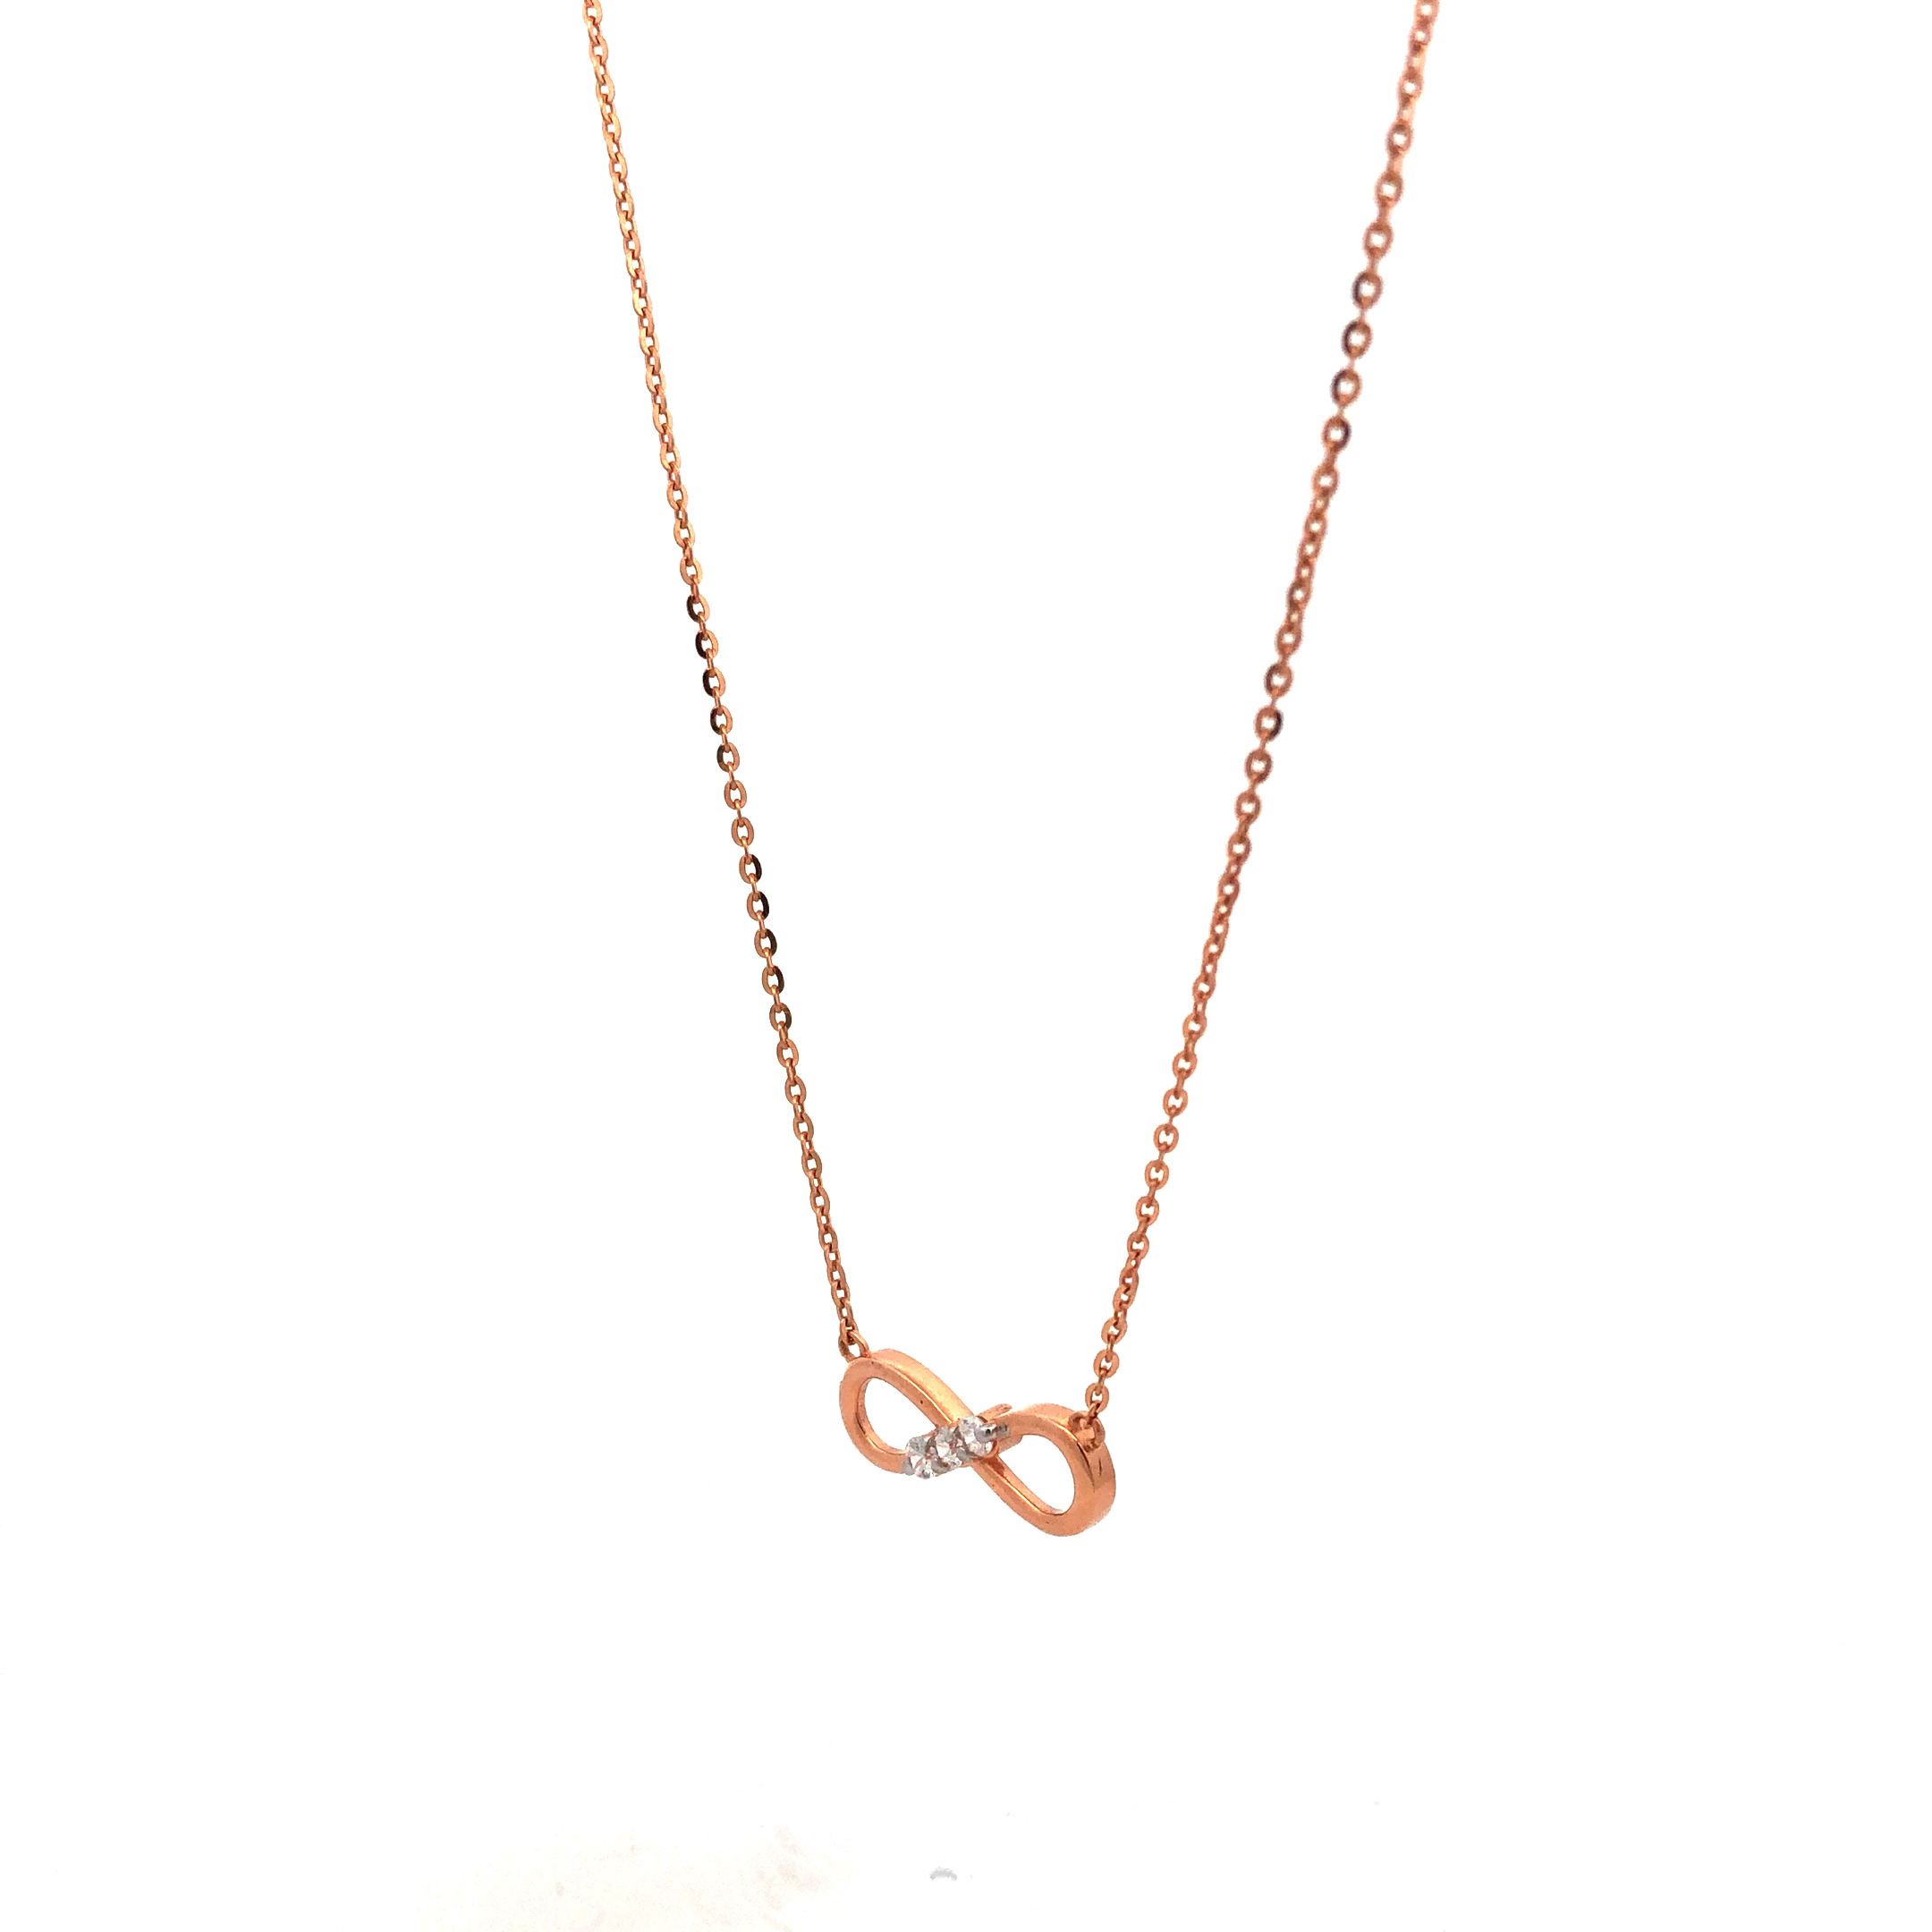 18kt Gold Infinity Chain